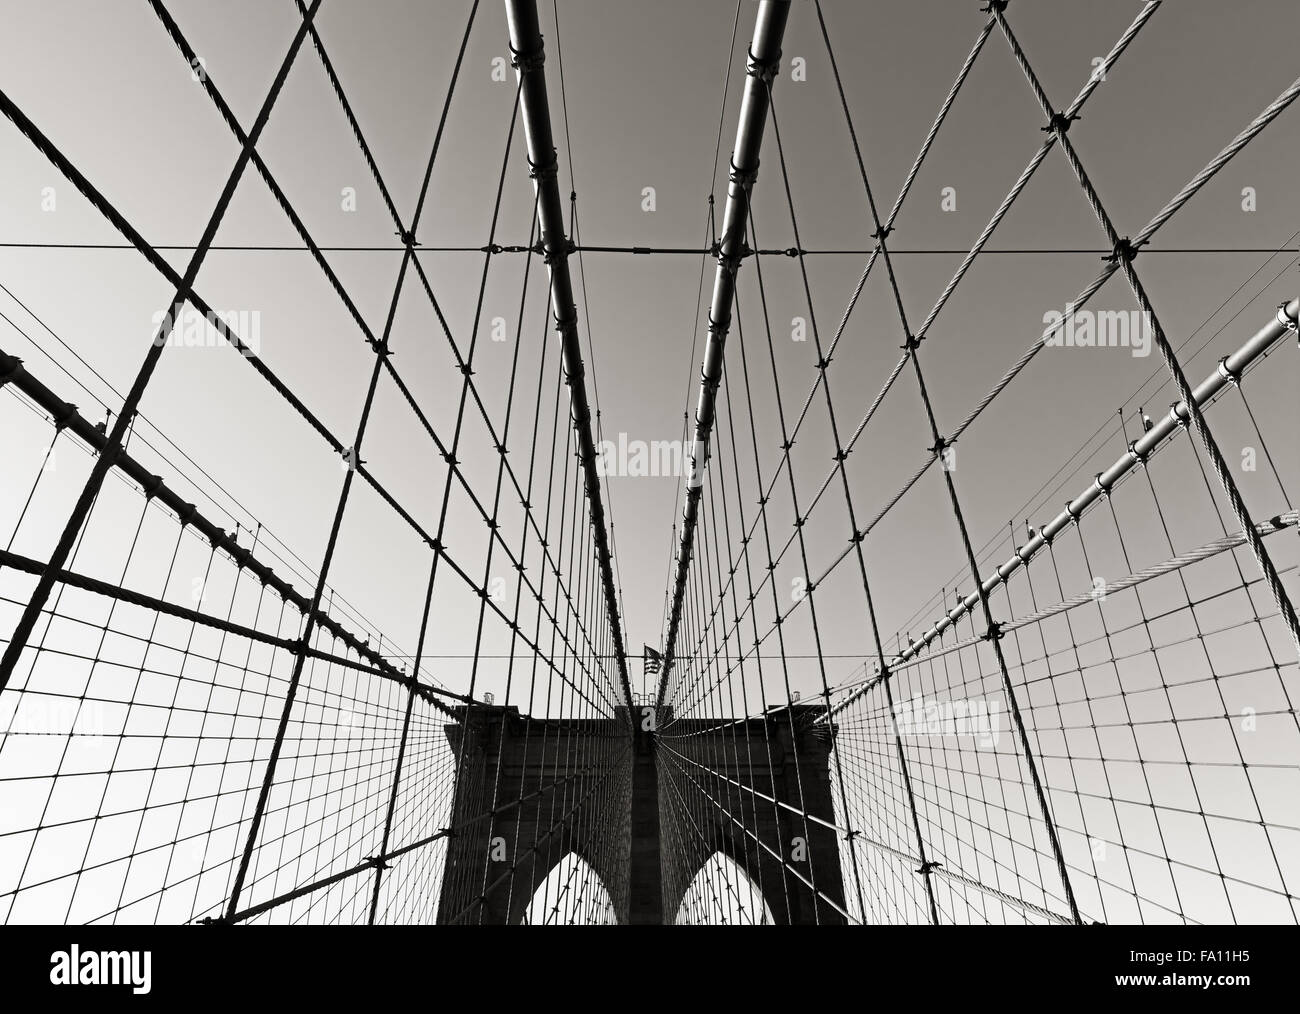 Brooklyn Bridge tower, in Black & White, with double gothic arches and symmetrical suspension cables, New York City Stock Photo